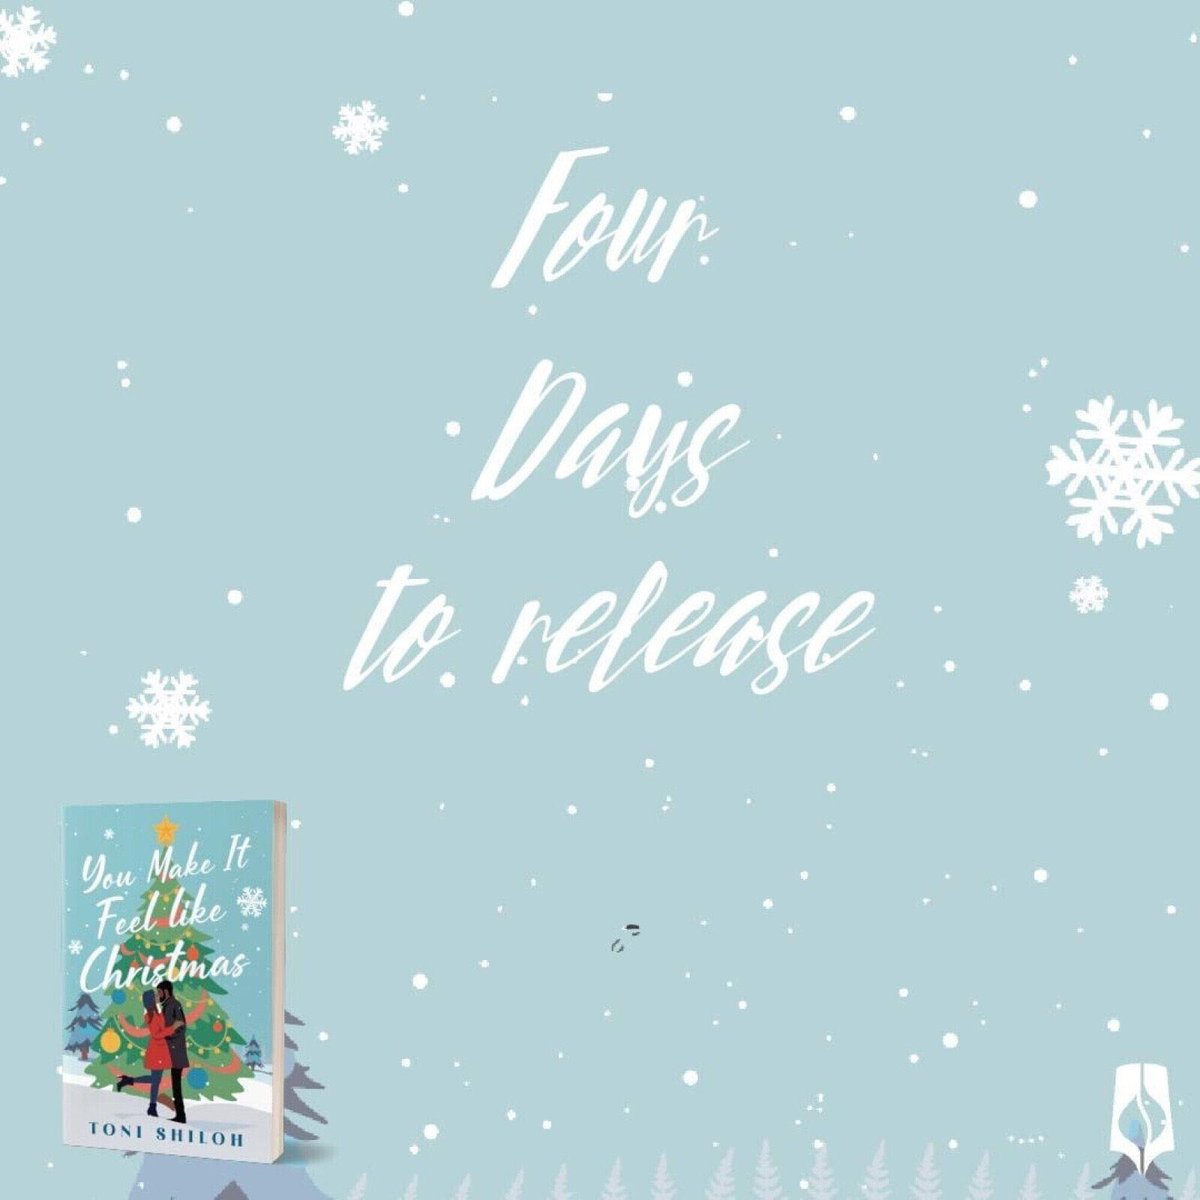 4 more sleeps until You Make It Feel Like Christmas 🎄 by ⁦@tonishilohwrite⁩ releases. You won't want to miss out on this sweet Christmas read. 
#stepintoashilohbook #youmakeitfeellikechristmas #christmasbooks #bhpfiction #christianfiction #blackromance #blackauthors